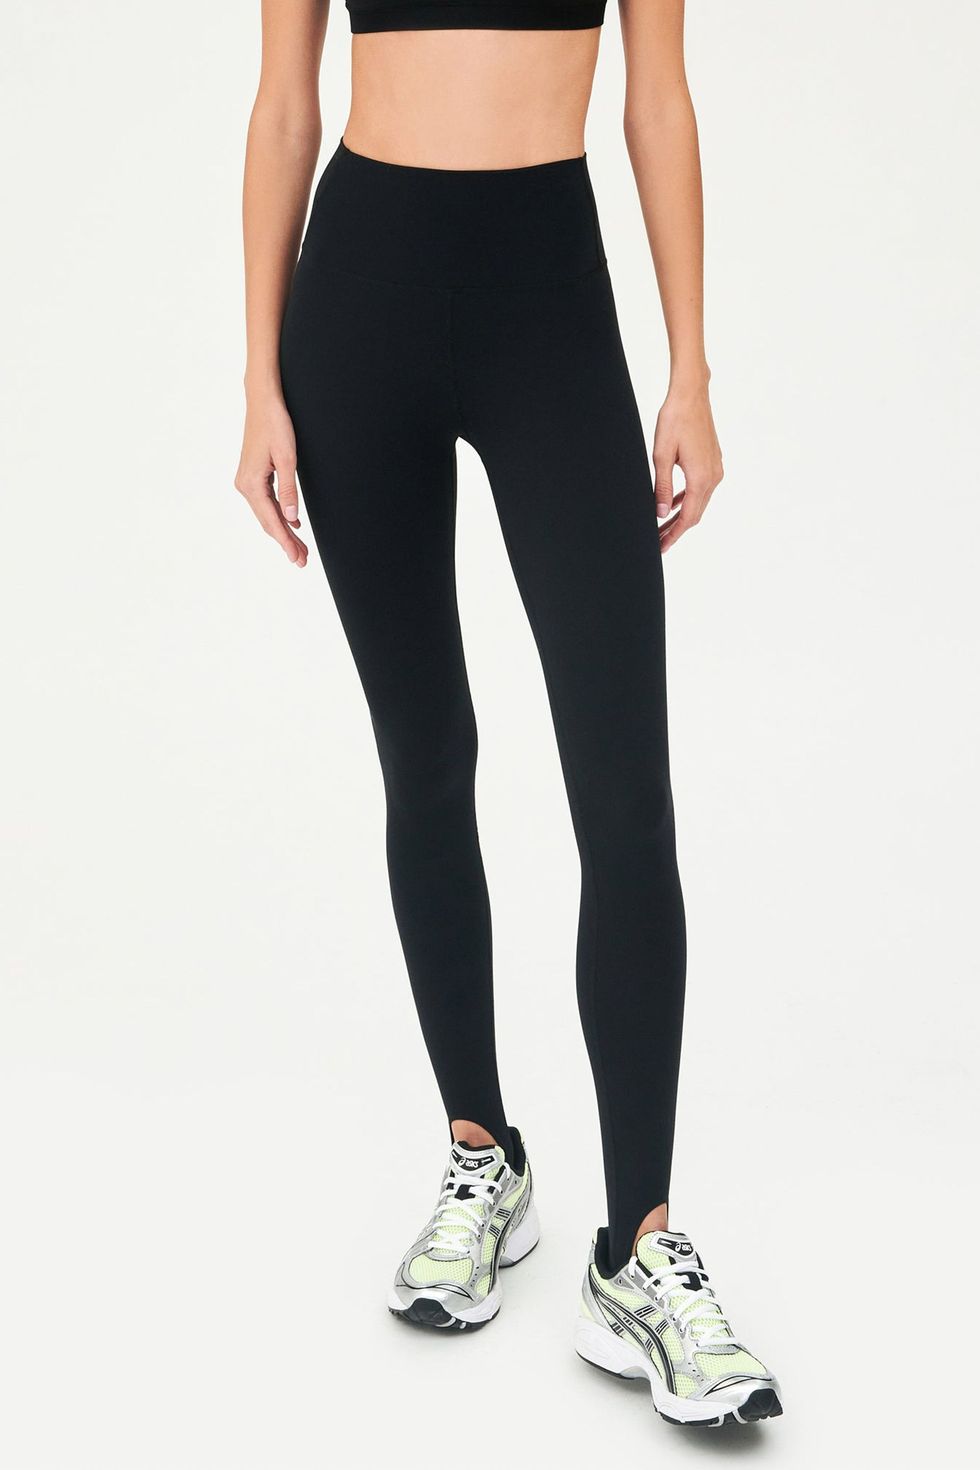 Fabletics Women's Boost PowerHold® High-Waisted Malaysia